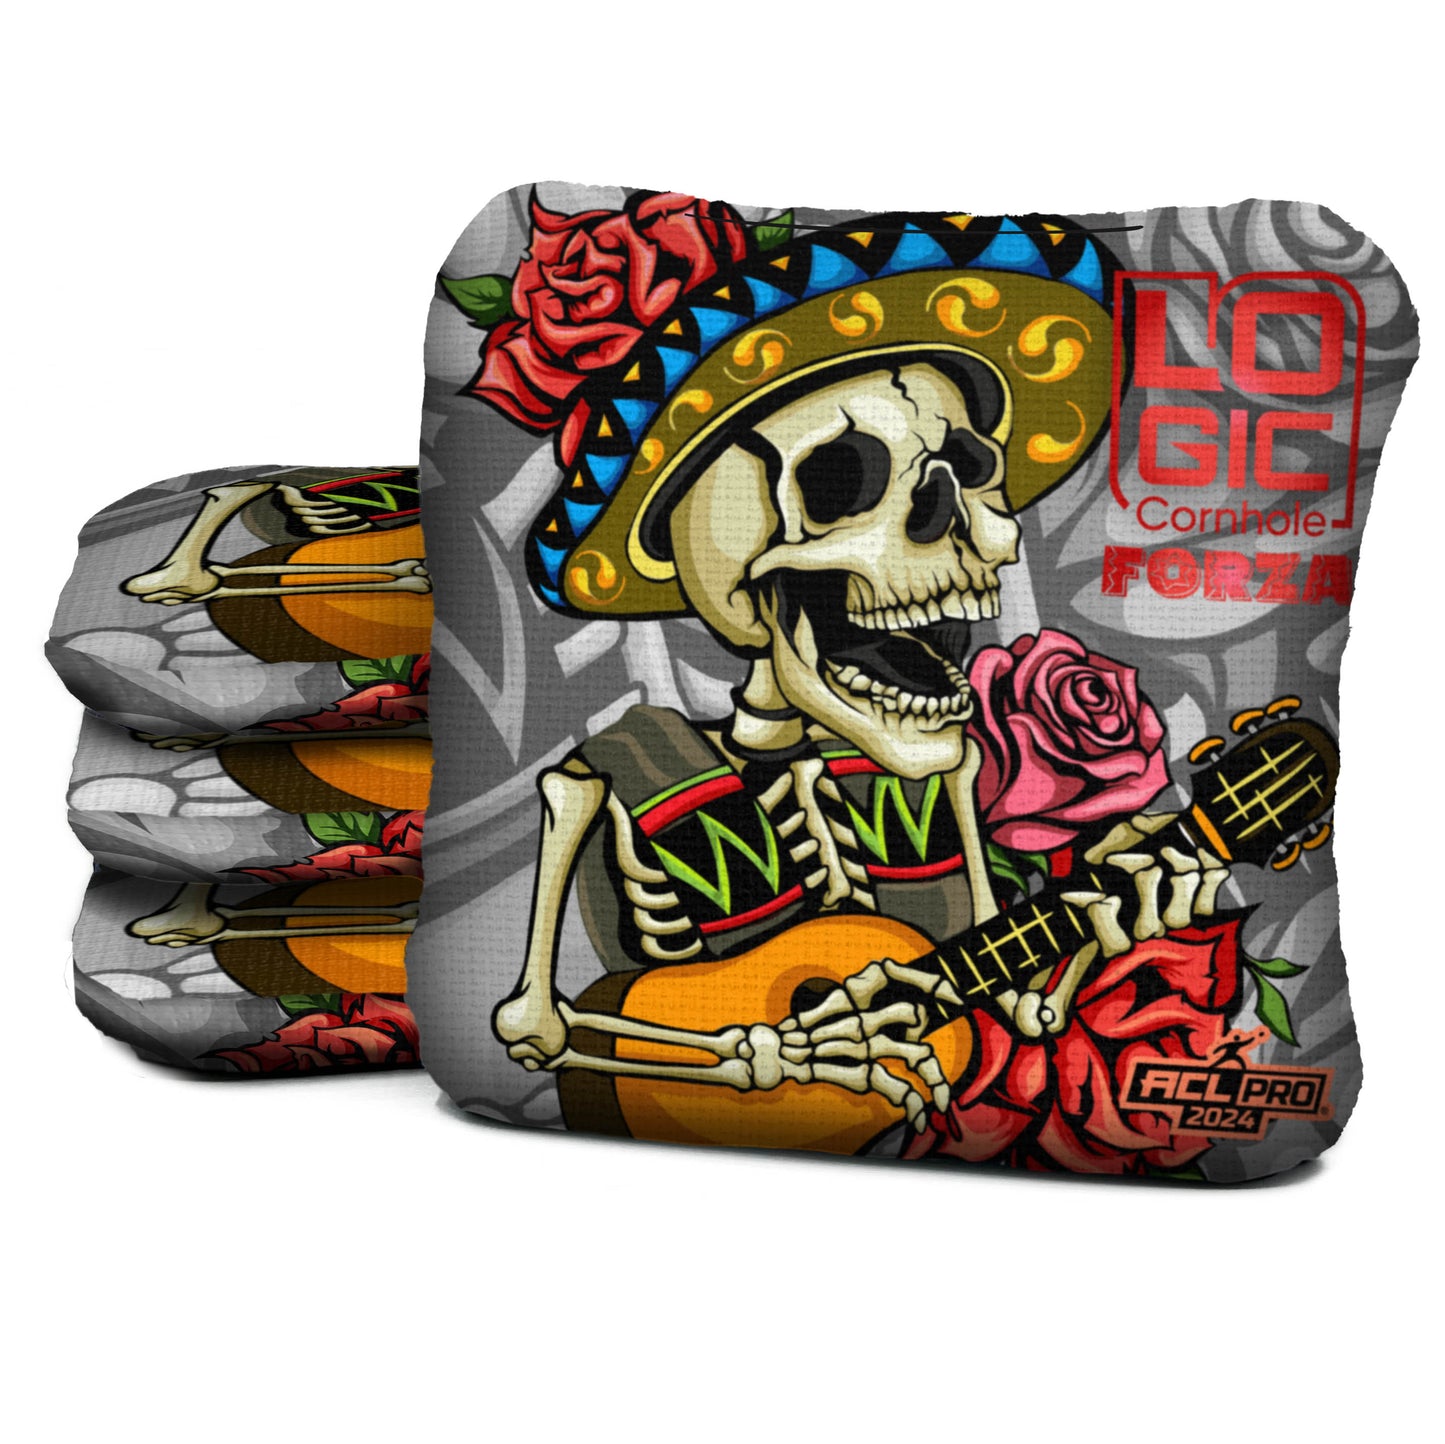 Mariachi - MULTIPLE BAG SERIES - ACL APPROVED BAGS - Set of 4 bags (RETIRED DESIGN)